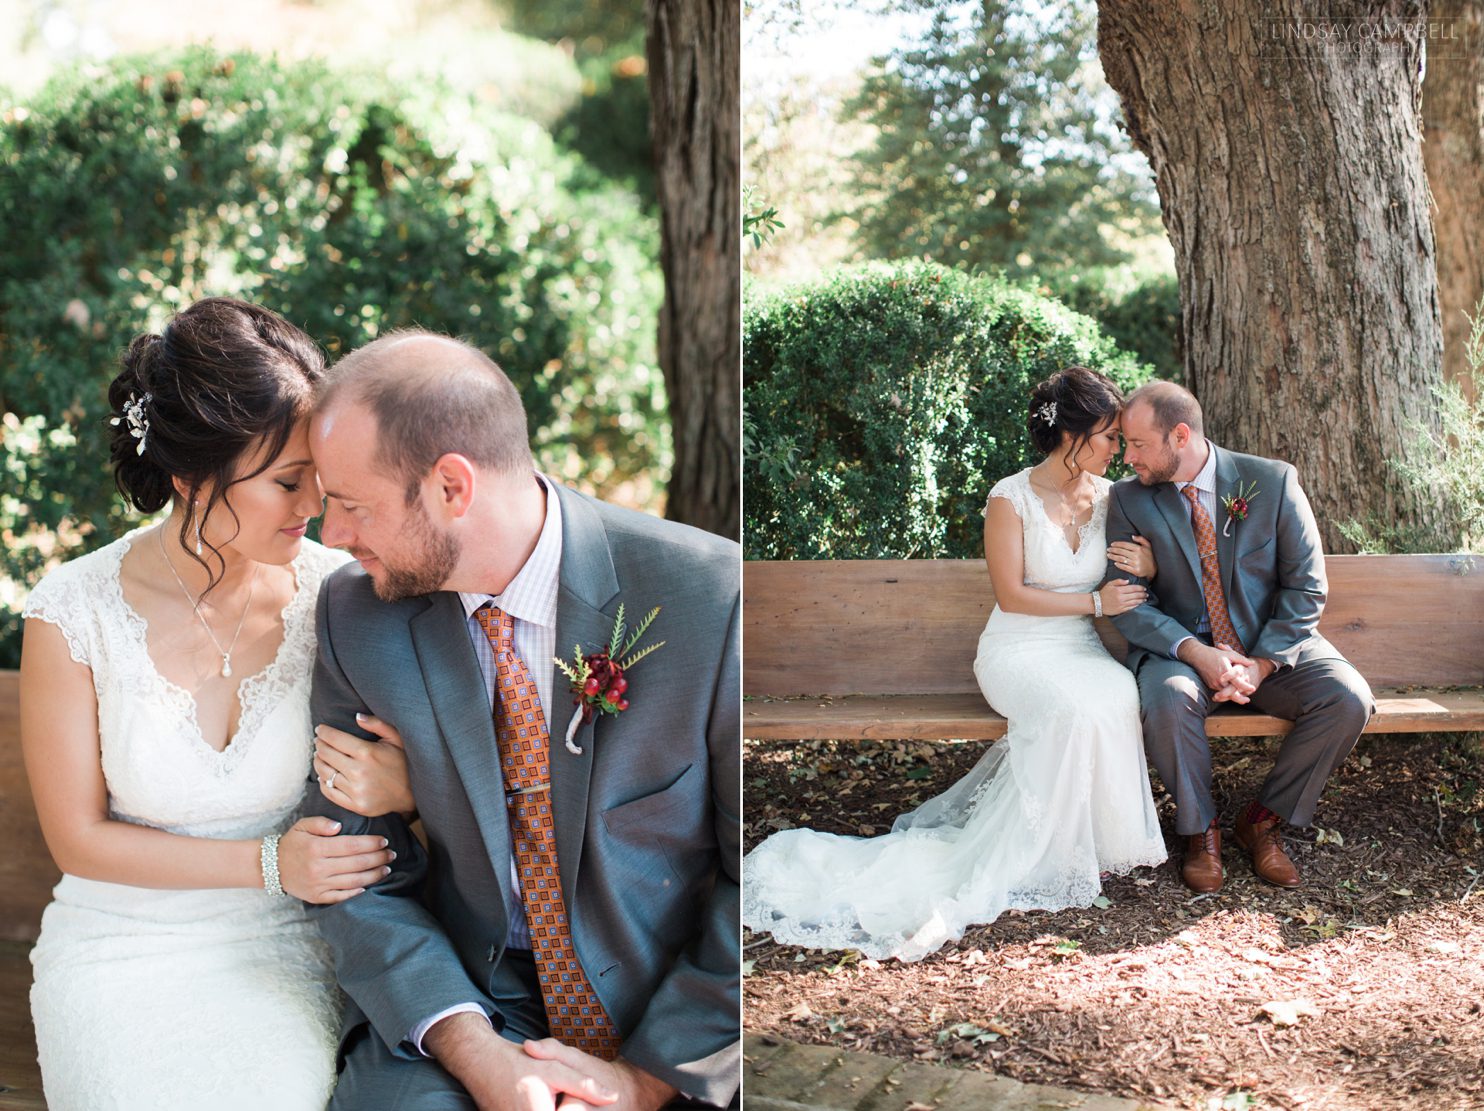 Taylor-and-Ryan-Homestead-Manor-Wedding-Photos-Spring-Hill-Wedding-Photographer_0038-2 Taylor and Ryan's Intimate Southern Estate Elopement at Homestead Manor